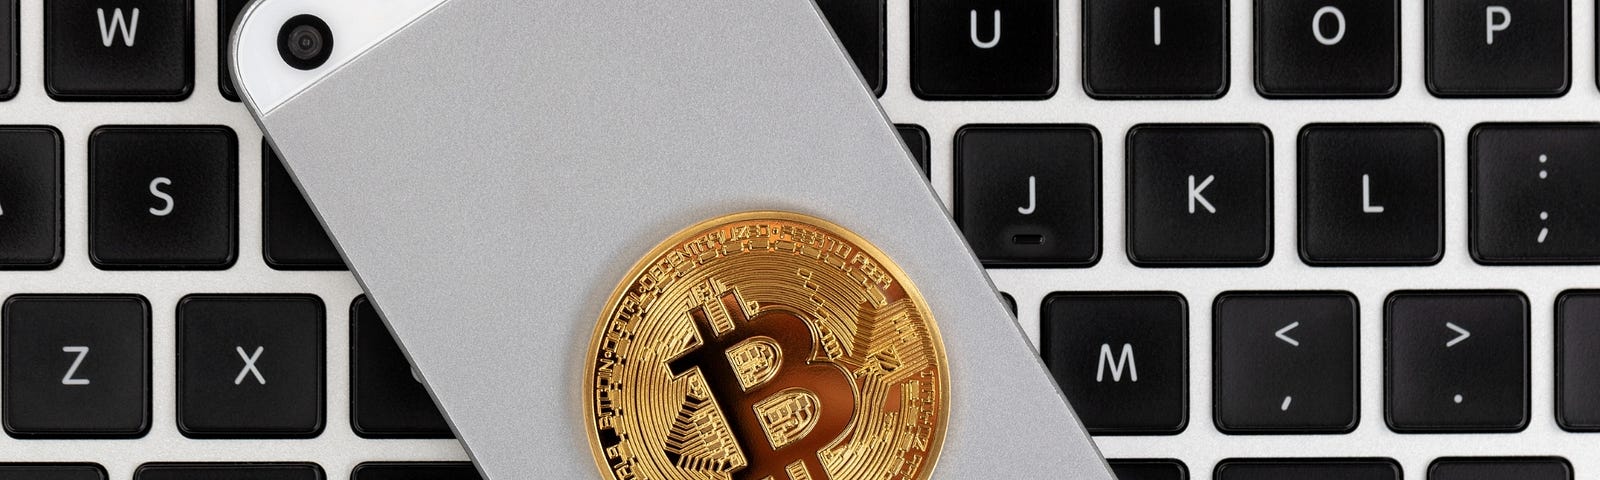 A Bitcoin laying on the back of a cell phone which is on top of a Macbook keyboard